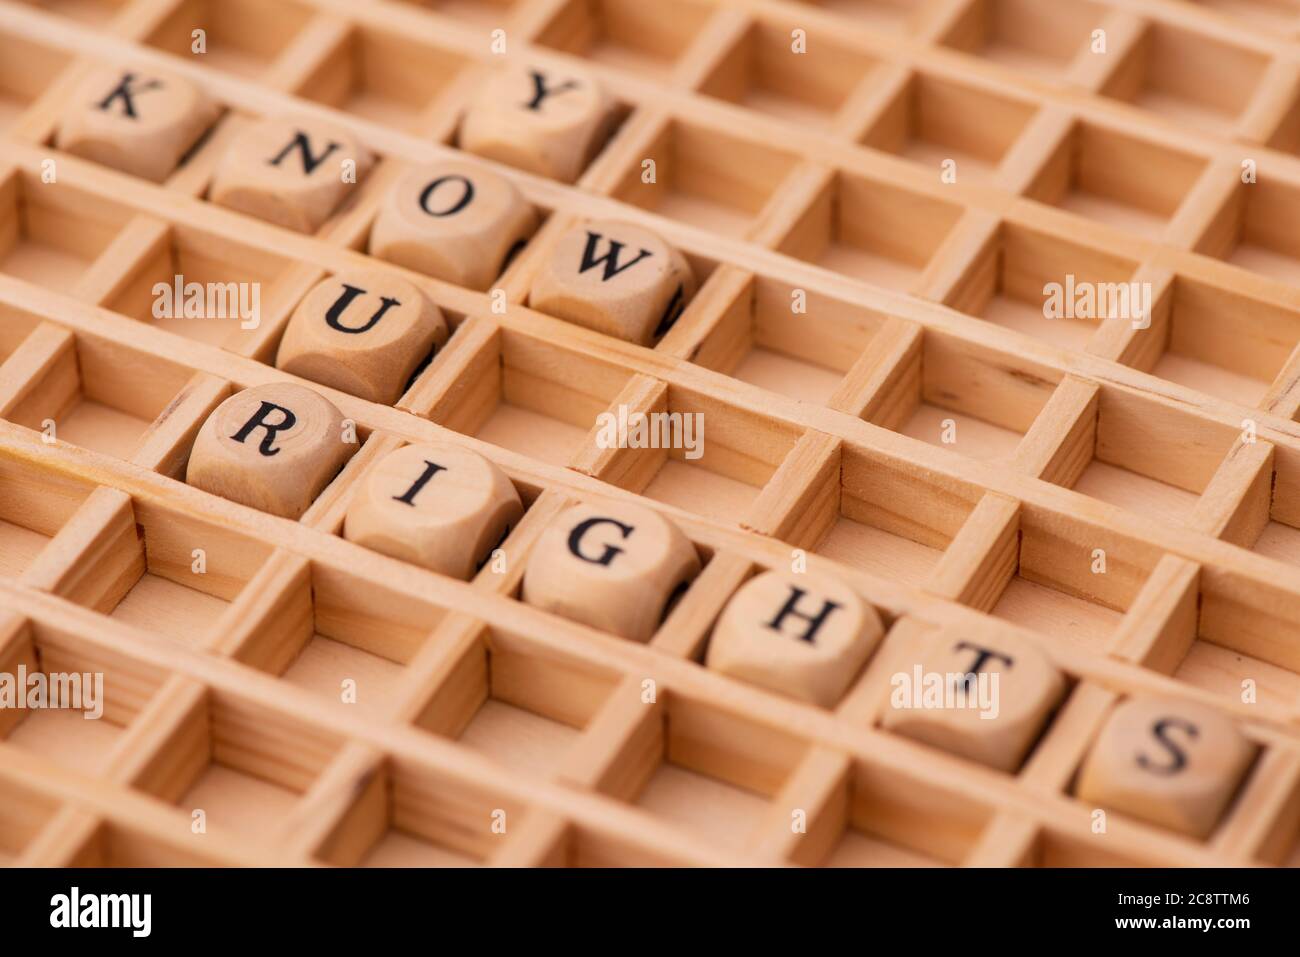 Word Cloud für Know Your Rights Stockfoto